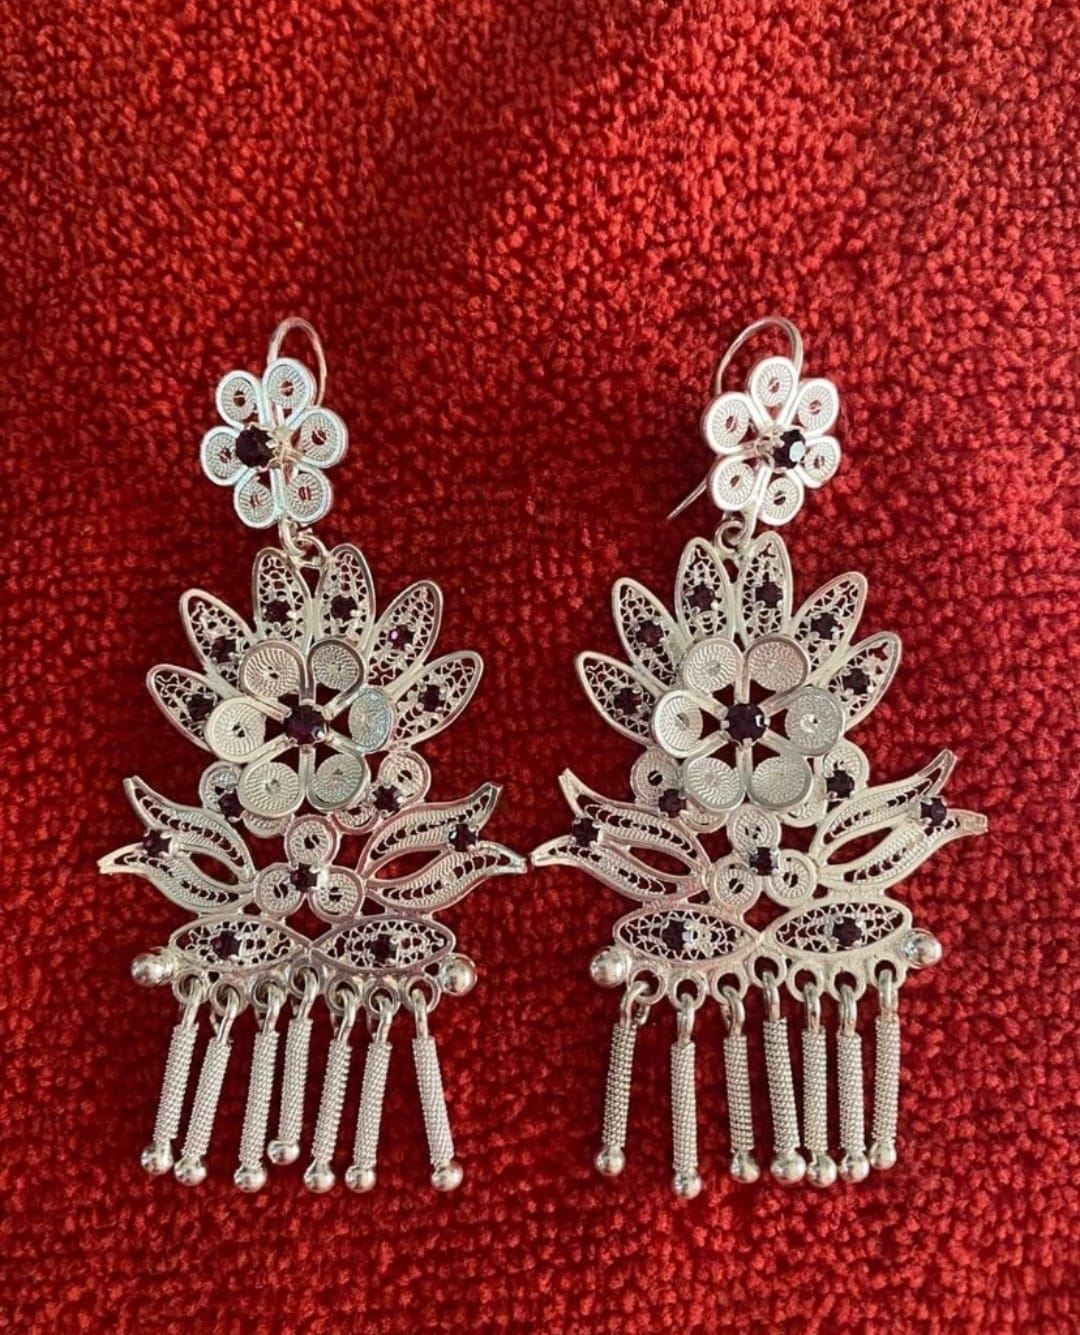 Highly Elaborated Silver Filigree Earrings - Handcrafted in Ecuador by Andean Artisan Women